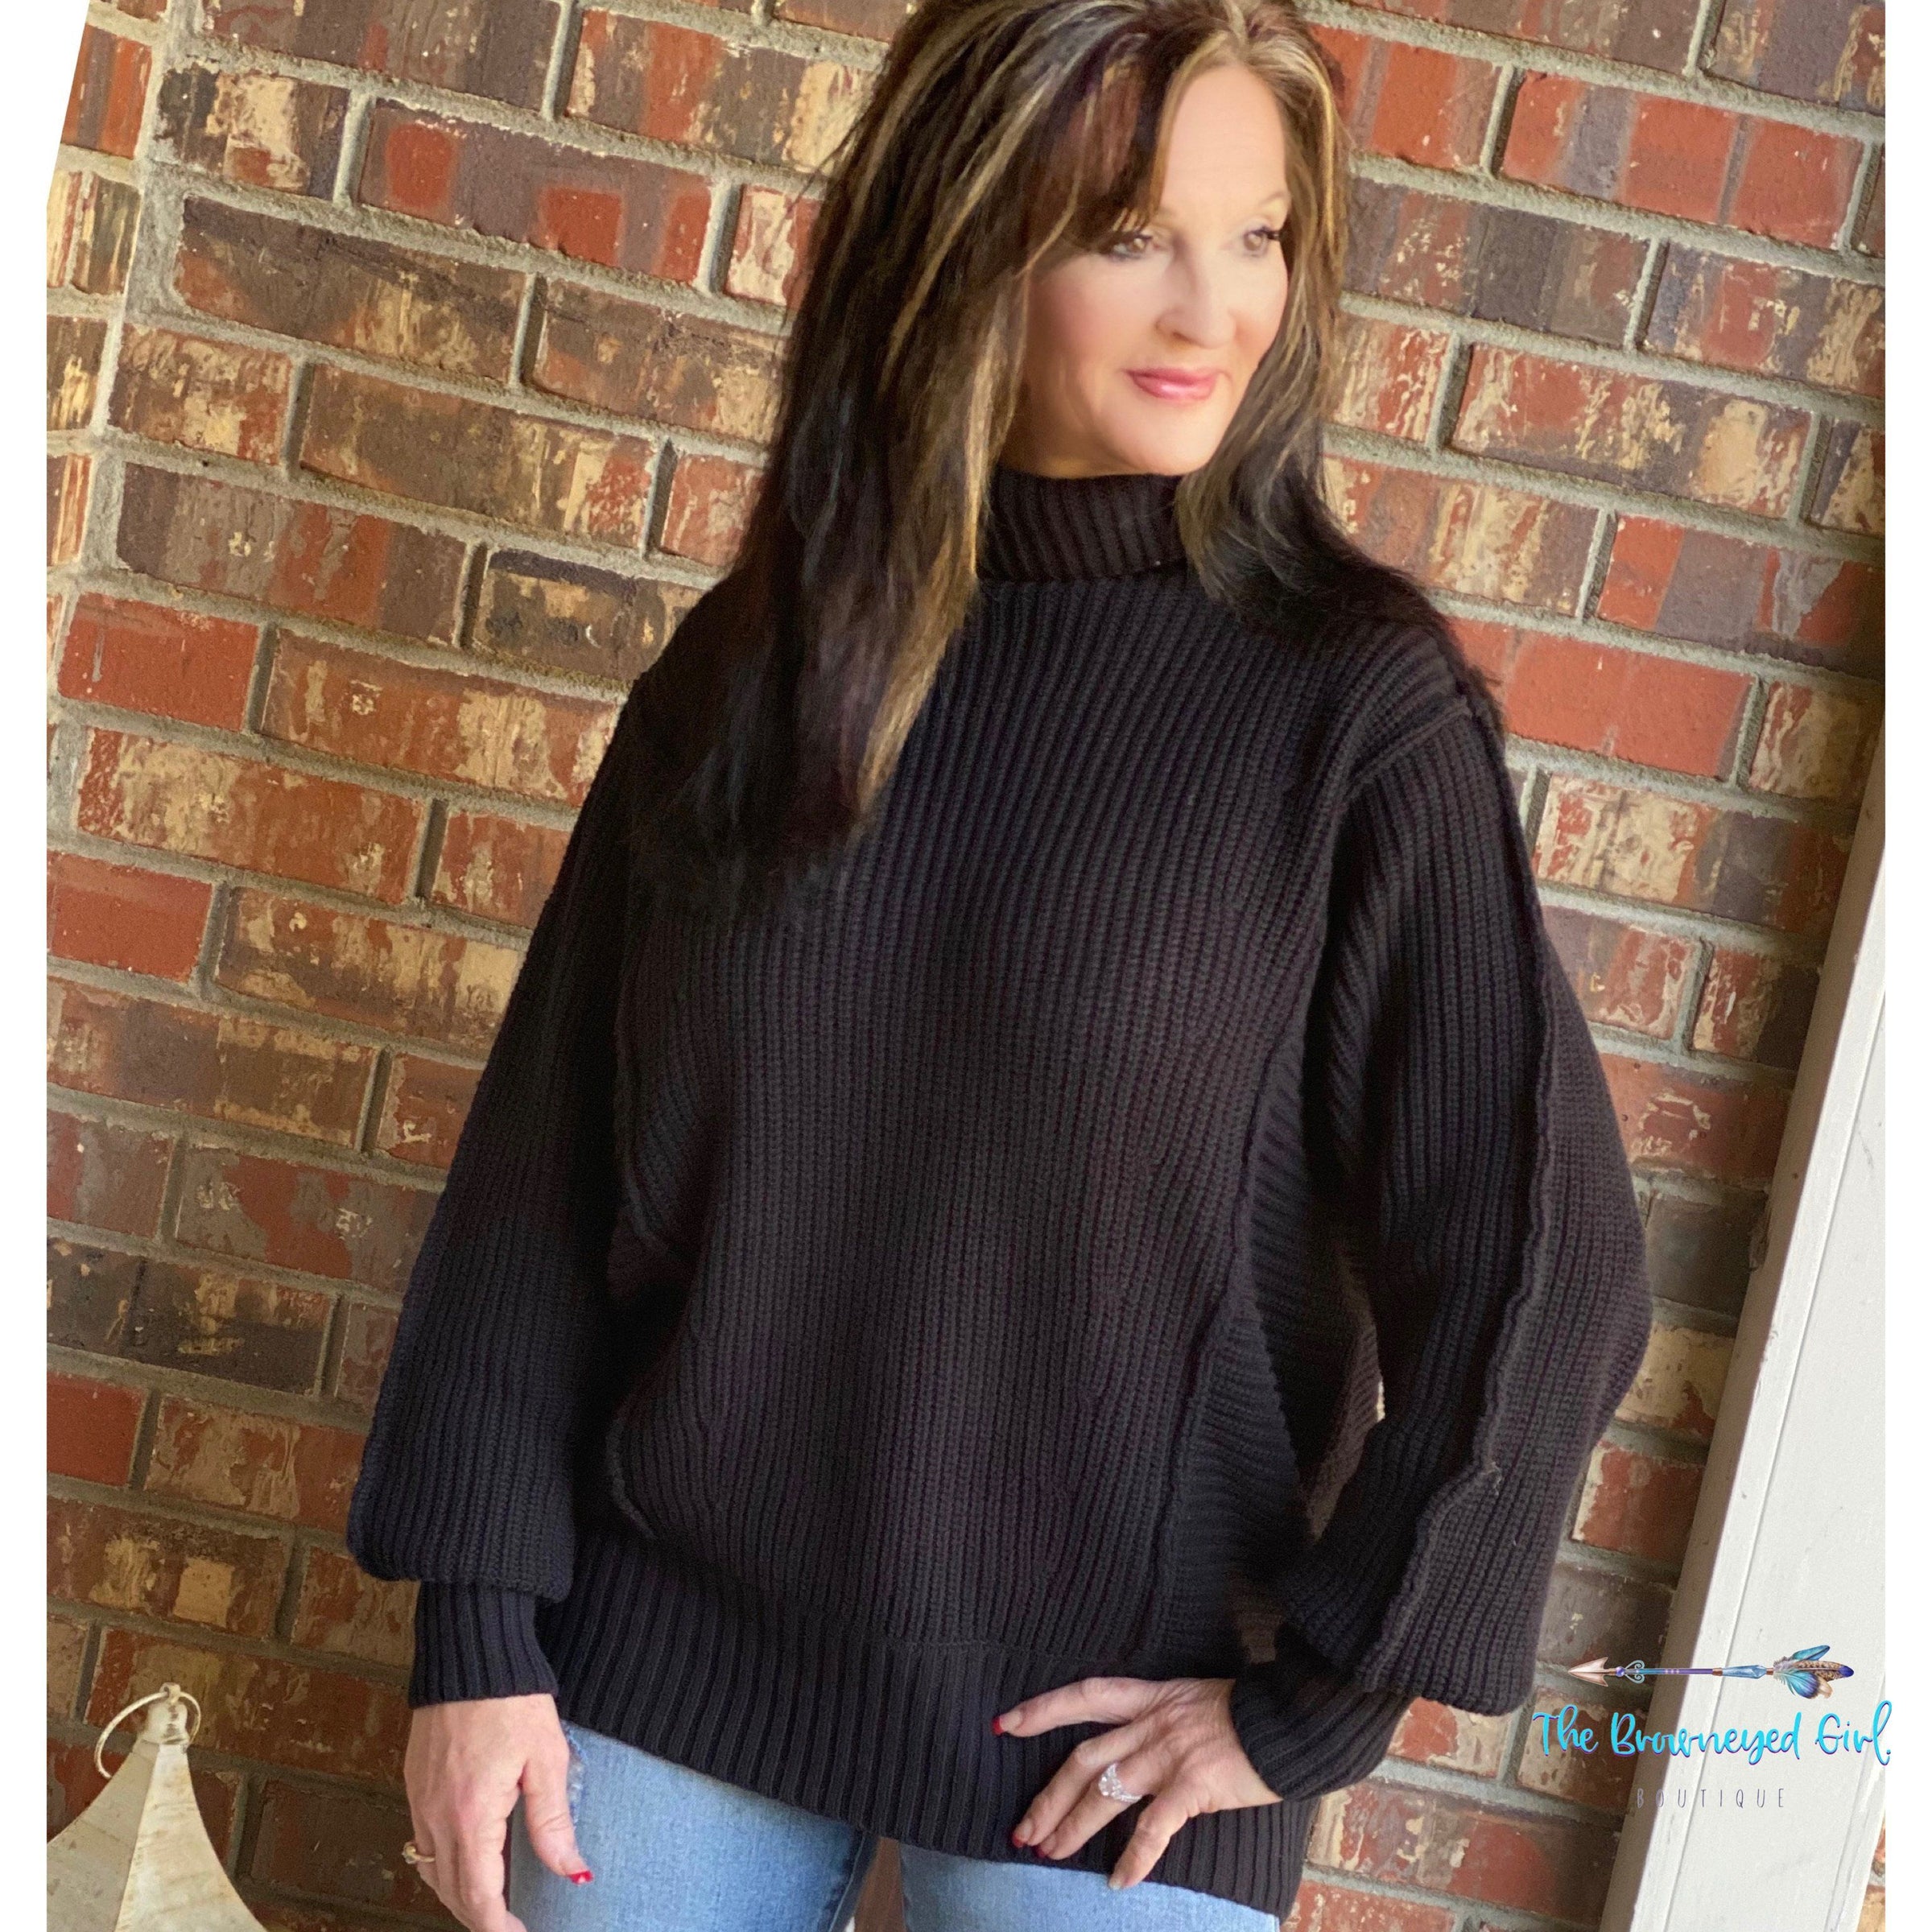 Woman wearing A Black Turtle Heavy Sweater With Stitching Detail Banded Cuffs And Hem